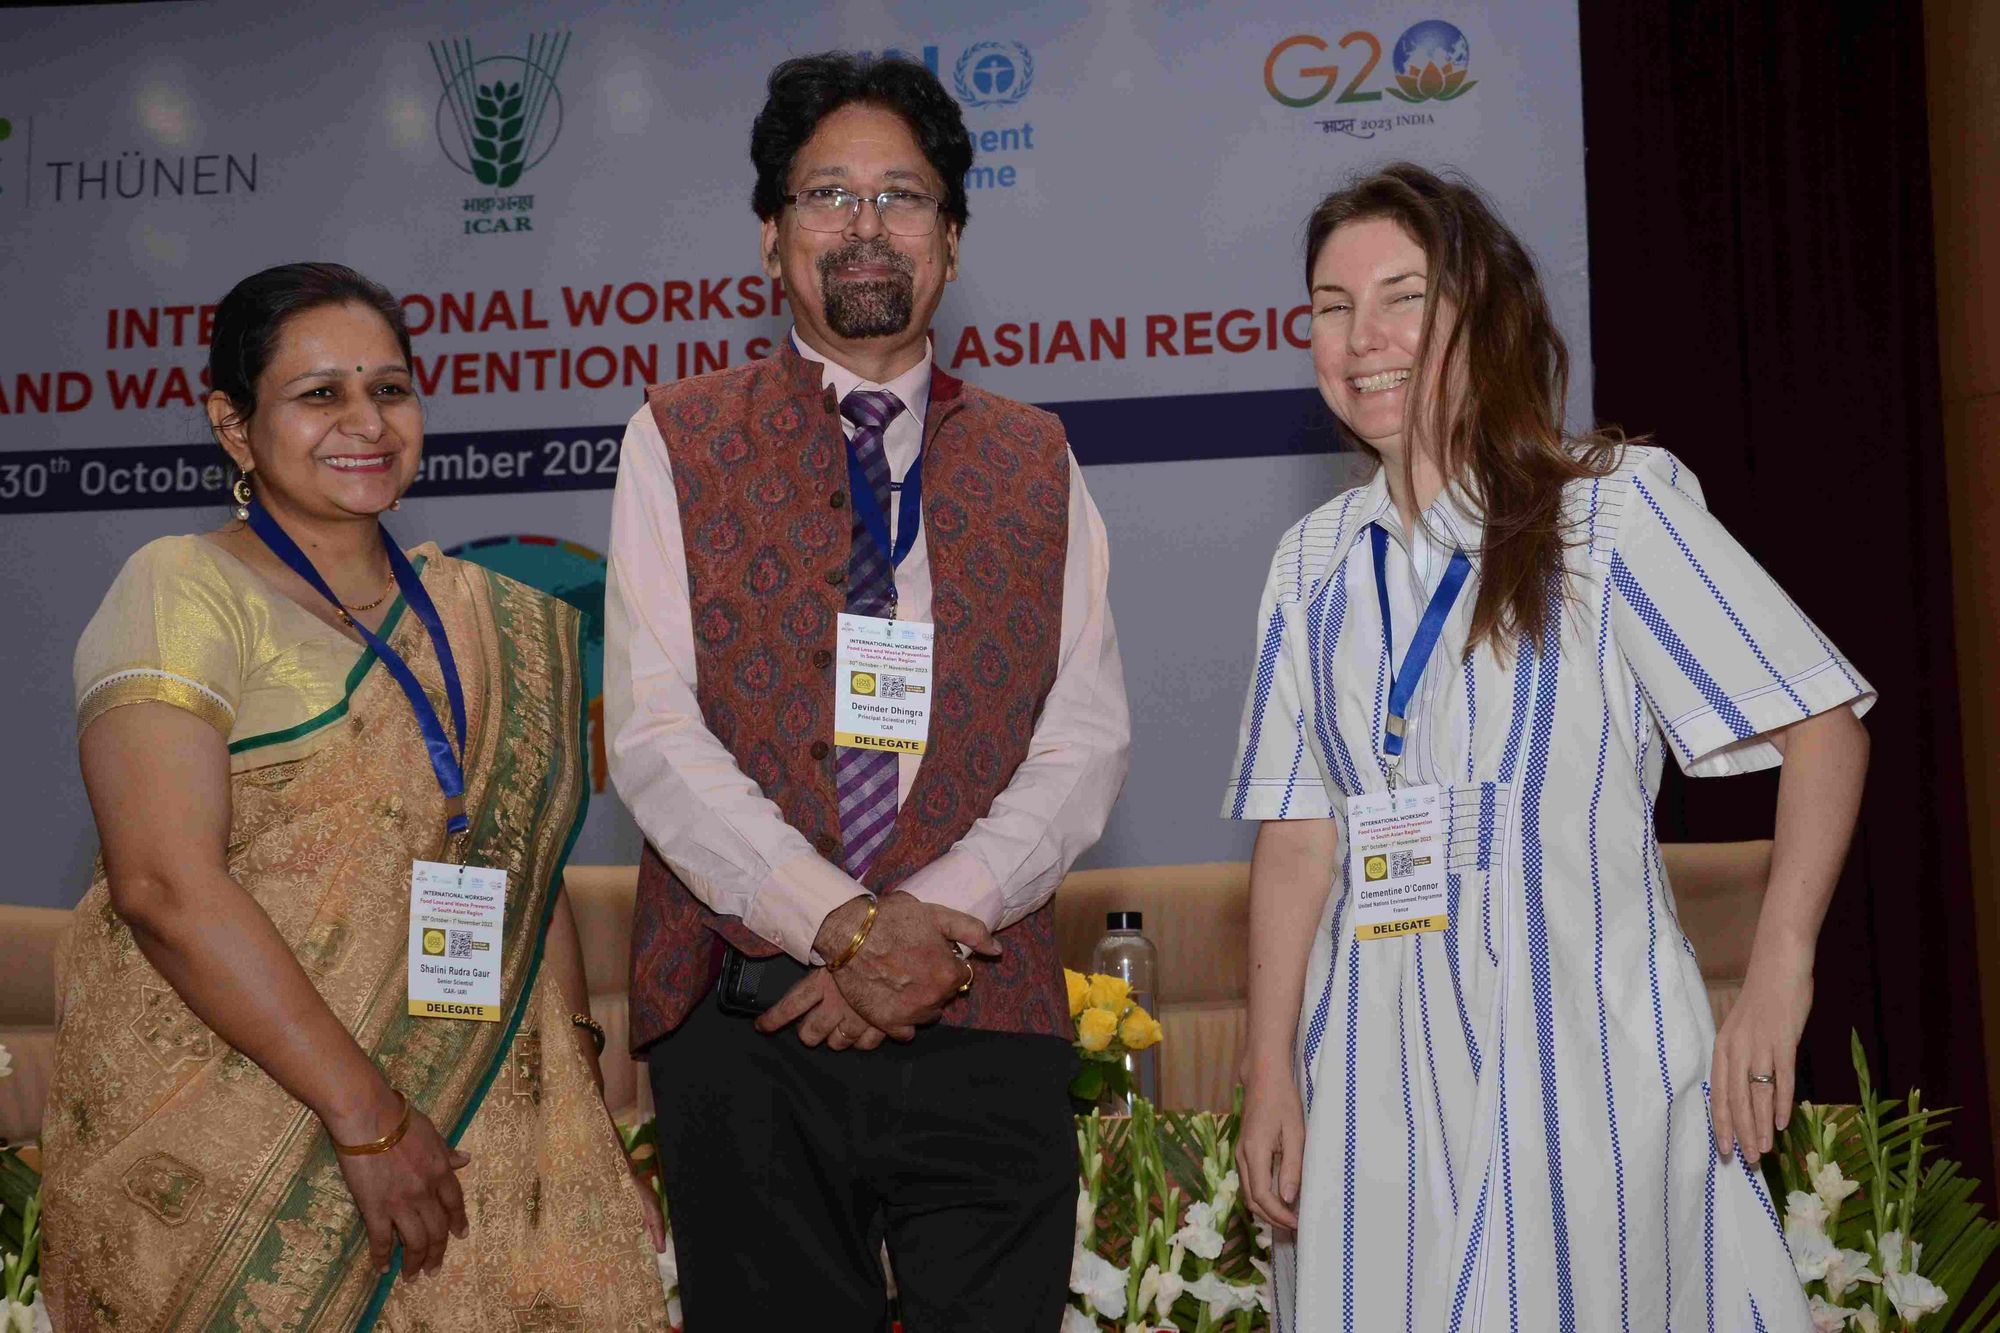 Dr Shalini Rudra Gaur, Indian Agricultural Research Institute at ICAR, Dr Devinder Dhingra, principal scientist at ICAR, and Ms Clementine O´Connor, United Nations Environmental Programme, posing together.